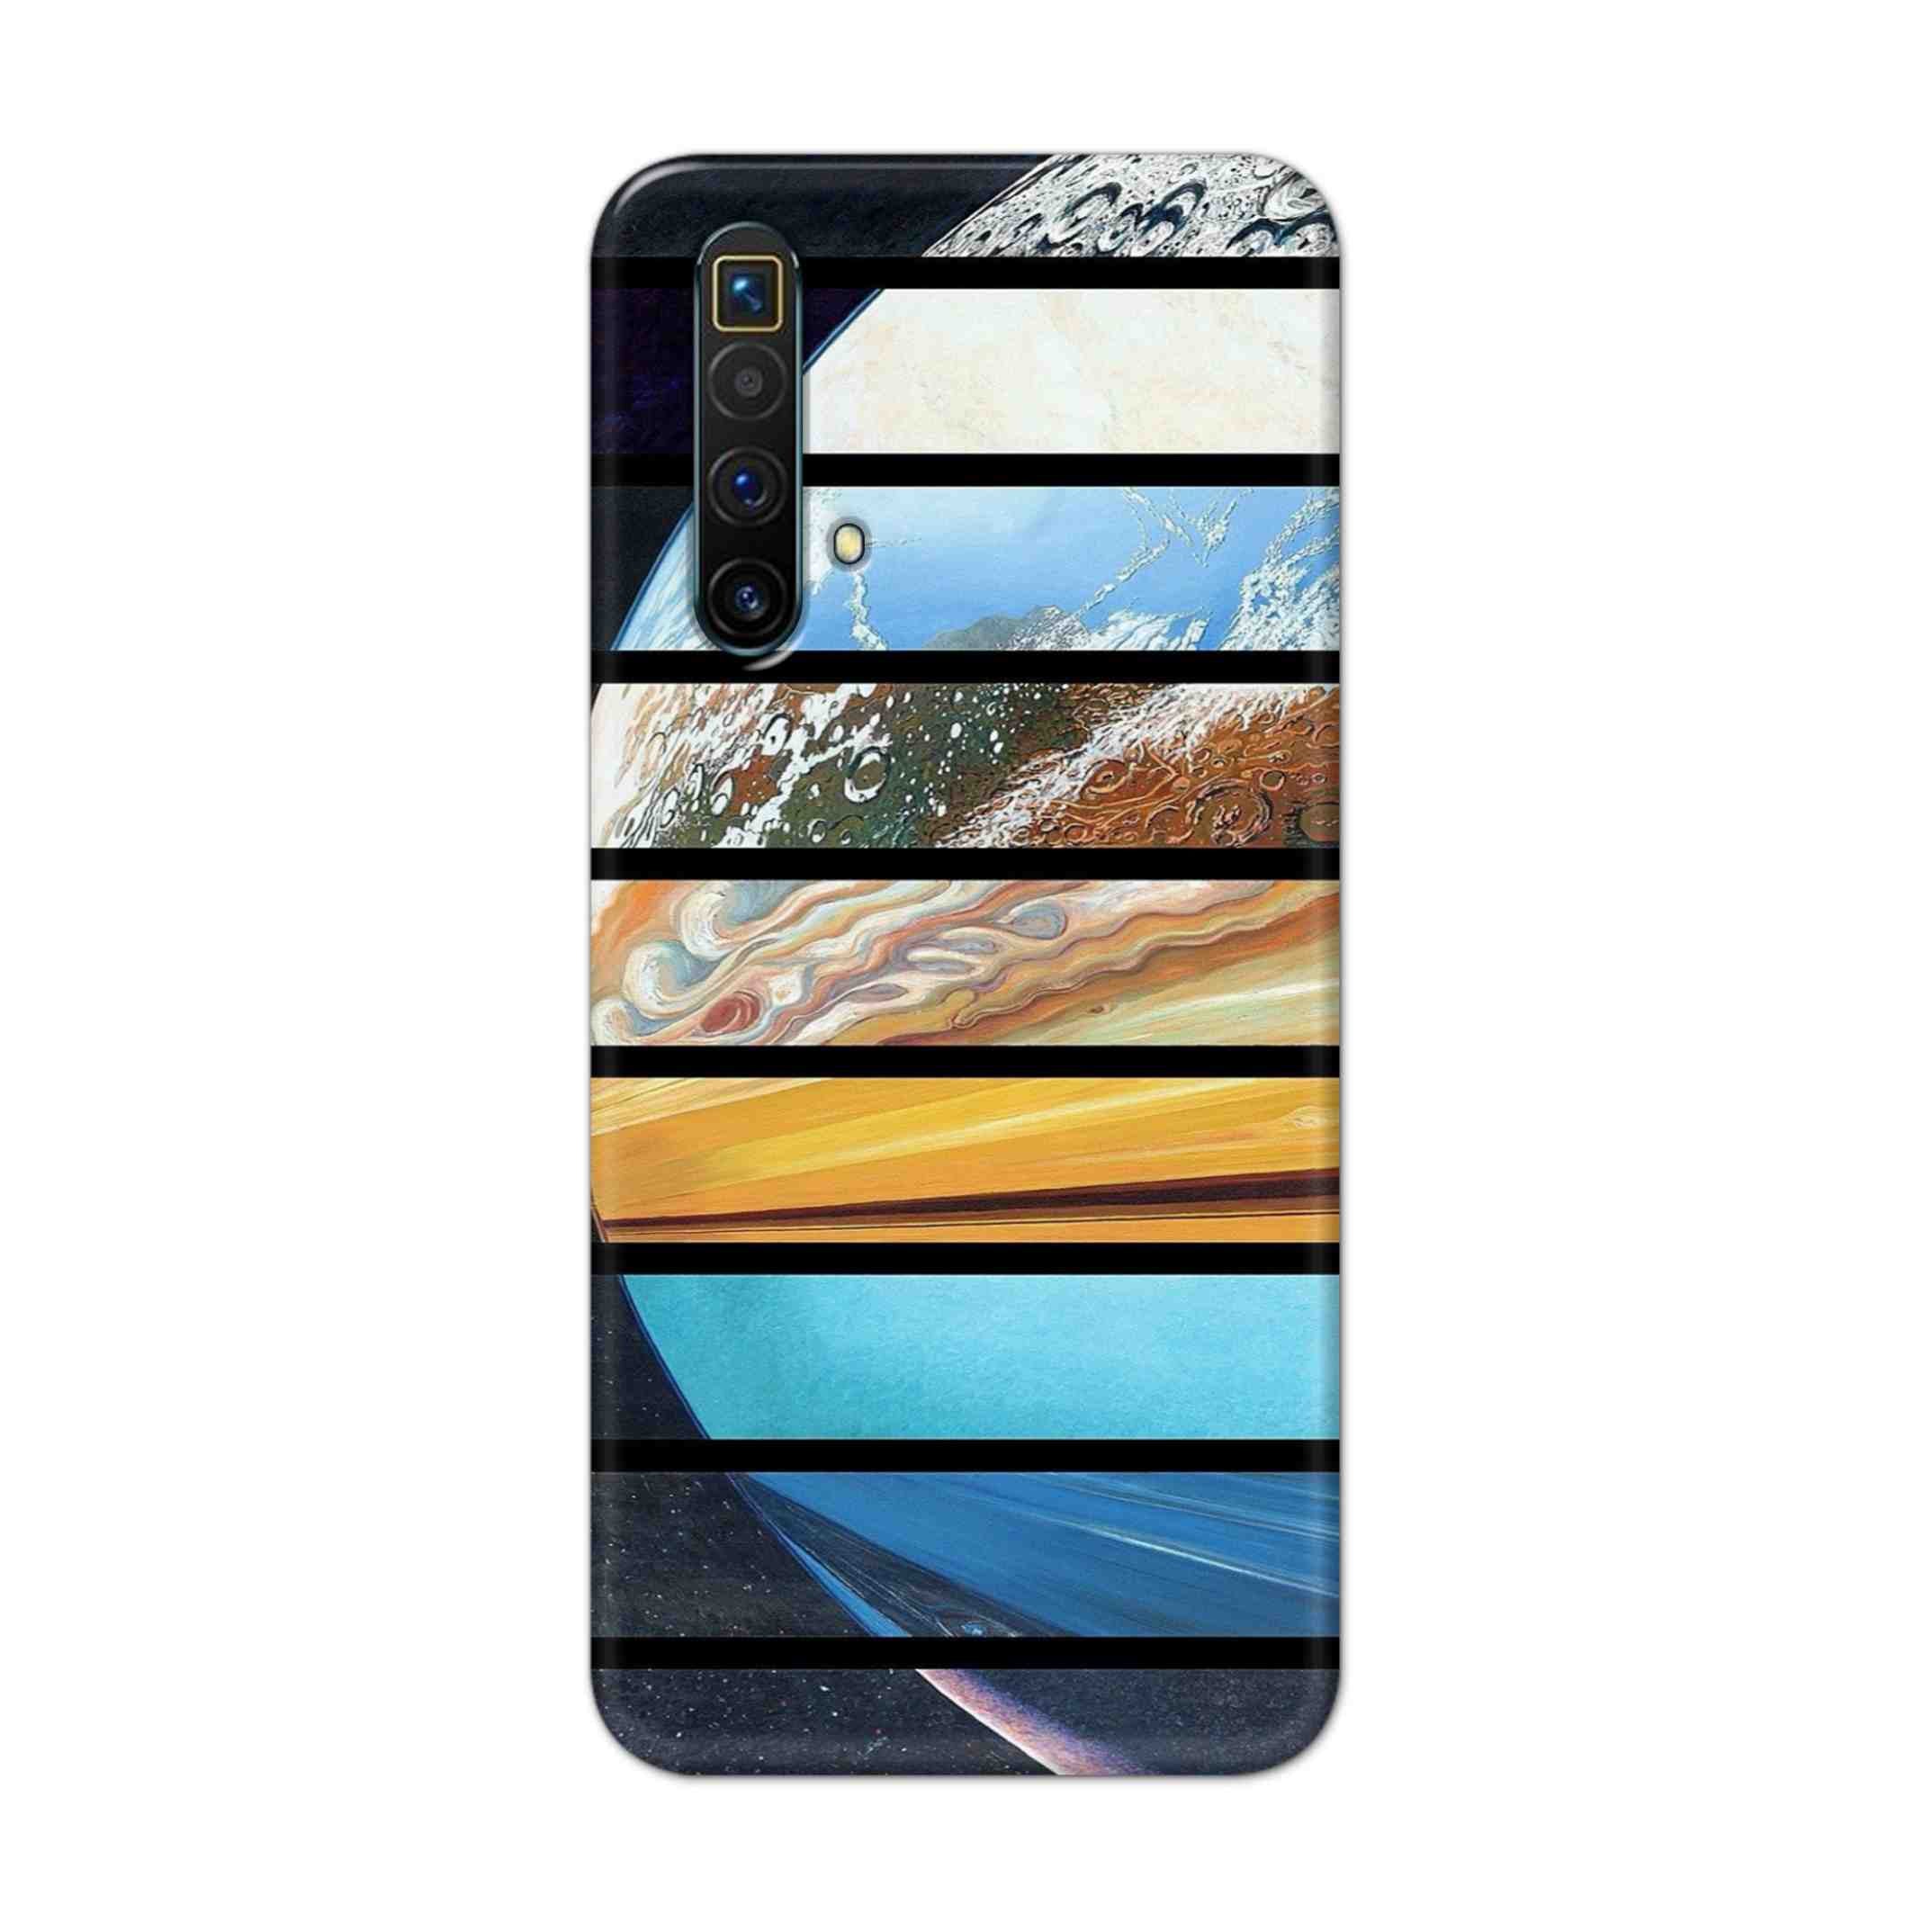 Buy Colourful Earth Hard Back Mobile Phone Case Cover For Oppo Realme X3 Online